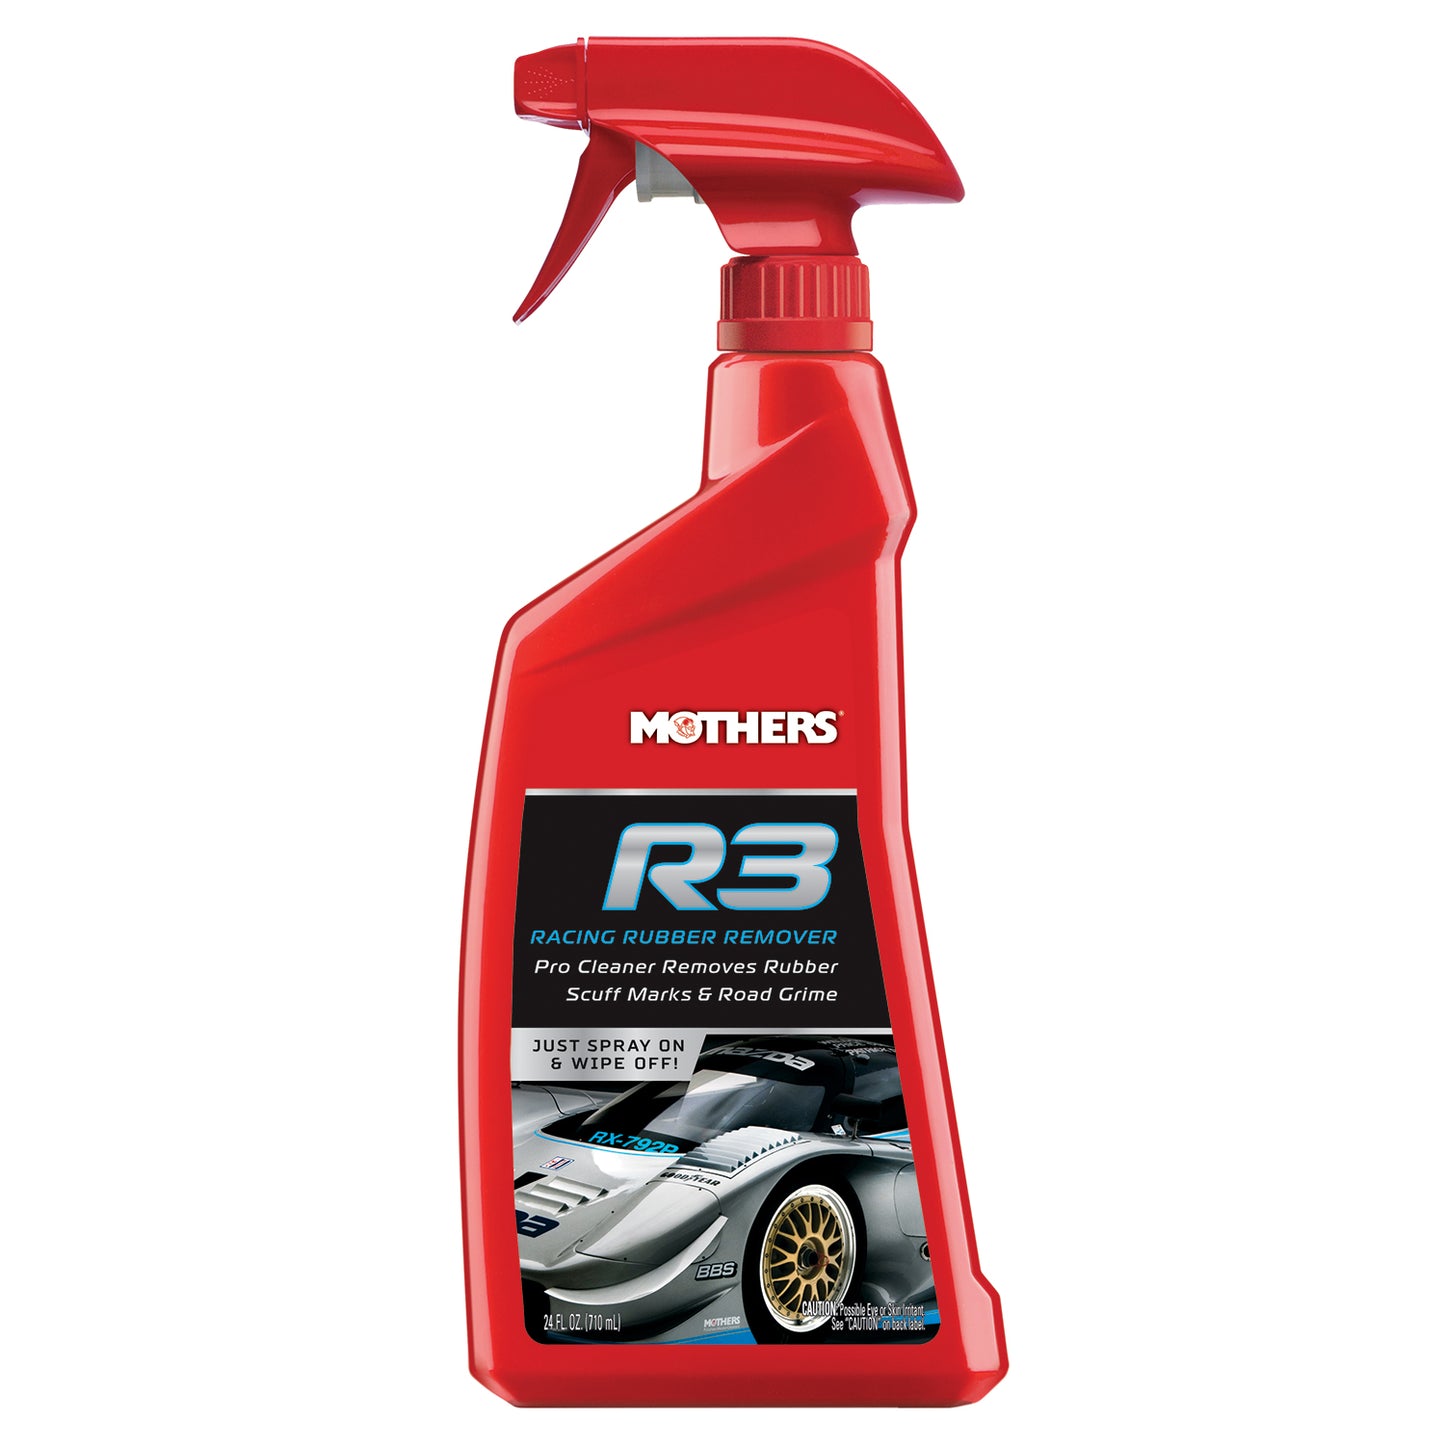 Mothers R3 Racing Rubber Remover